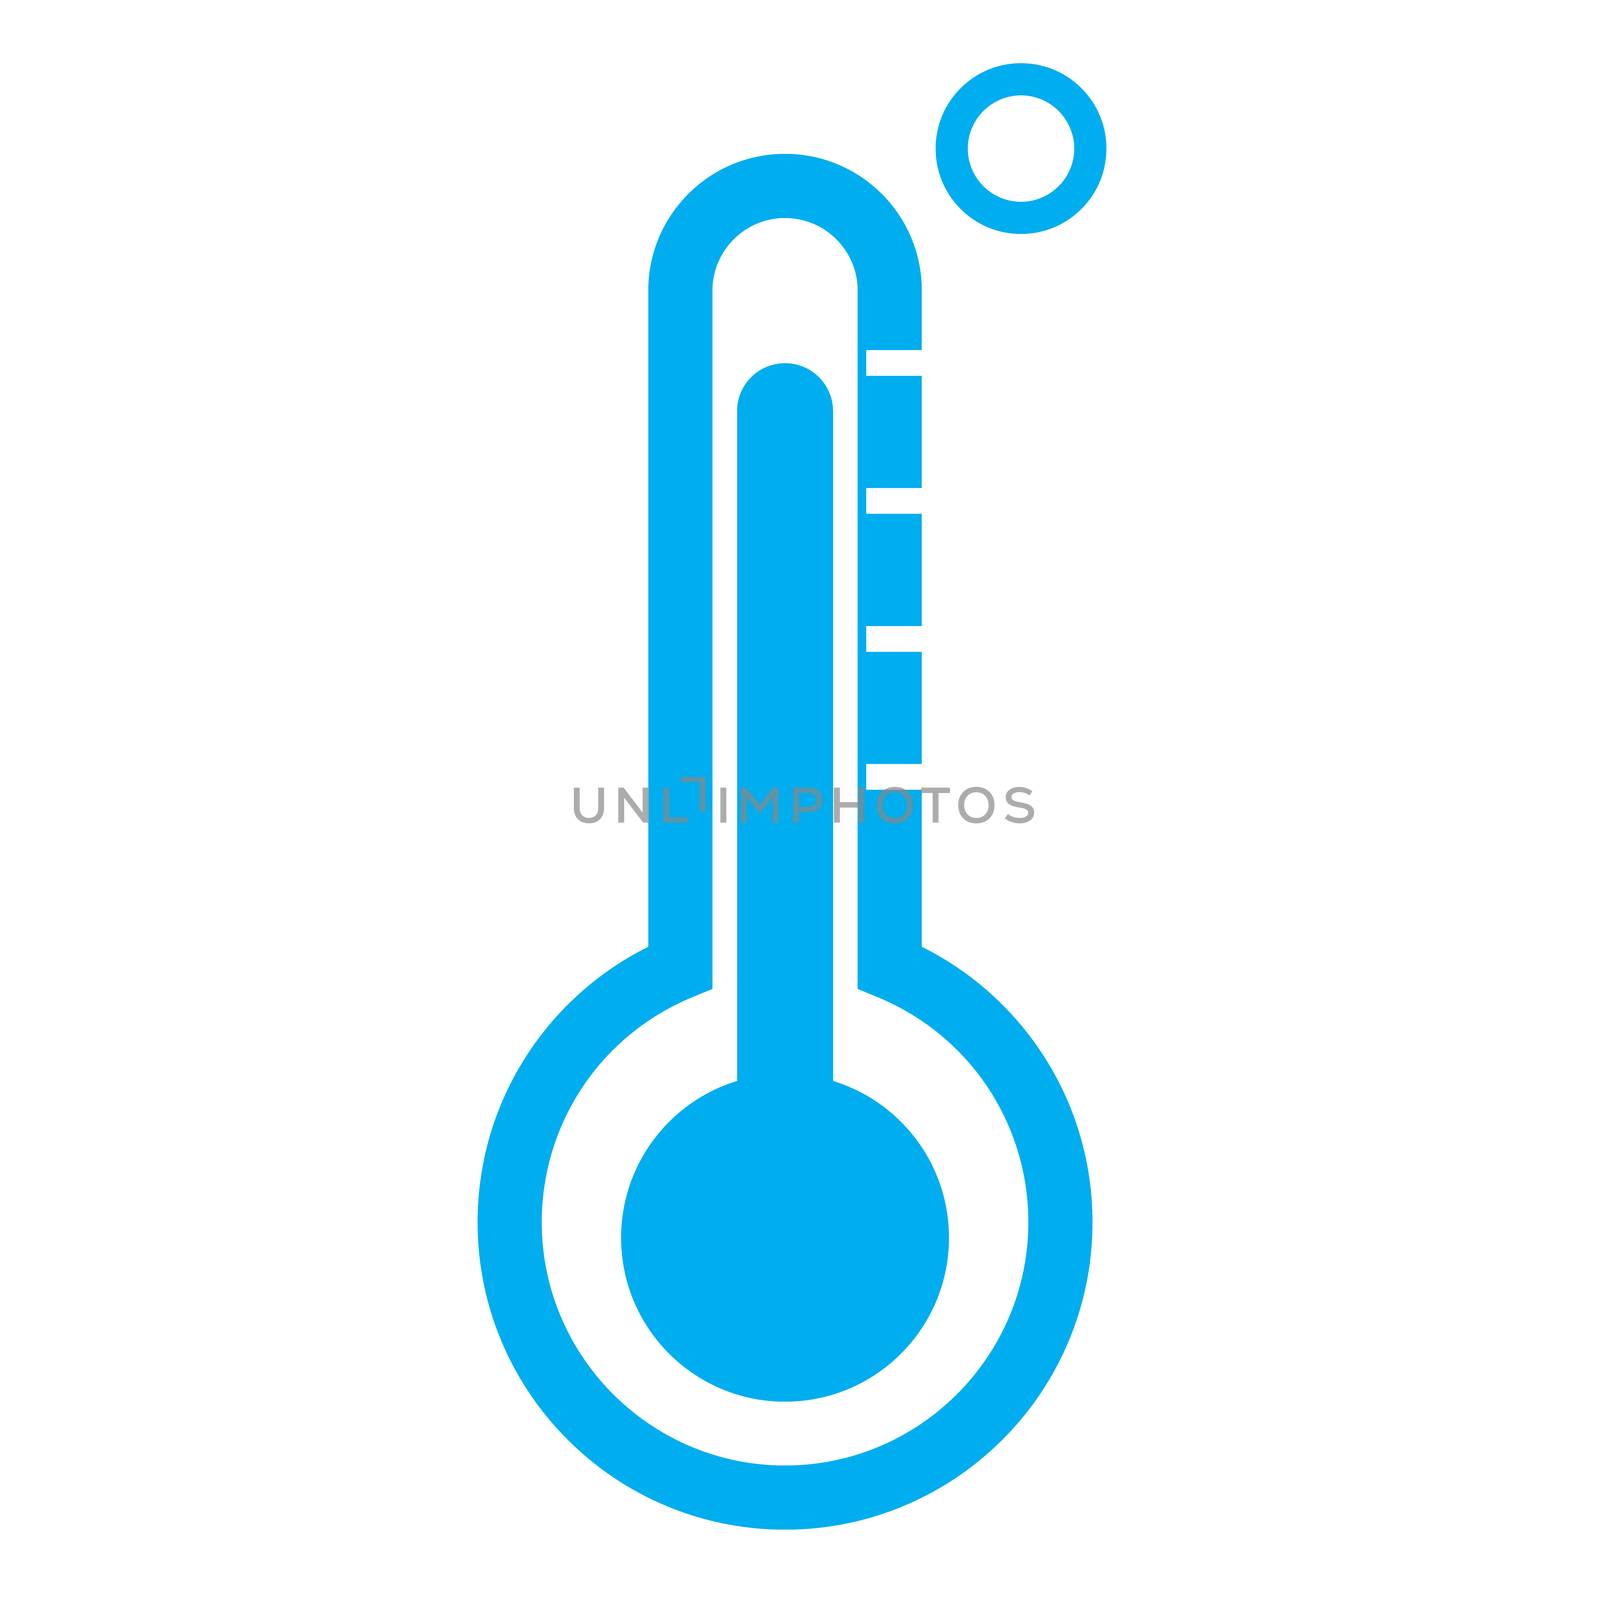 thermometer icon on white background. flat style.thermometer icon for your web site design, logo, app, UI. thermometer symbol.